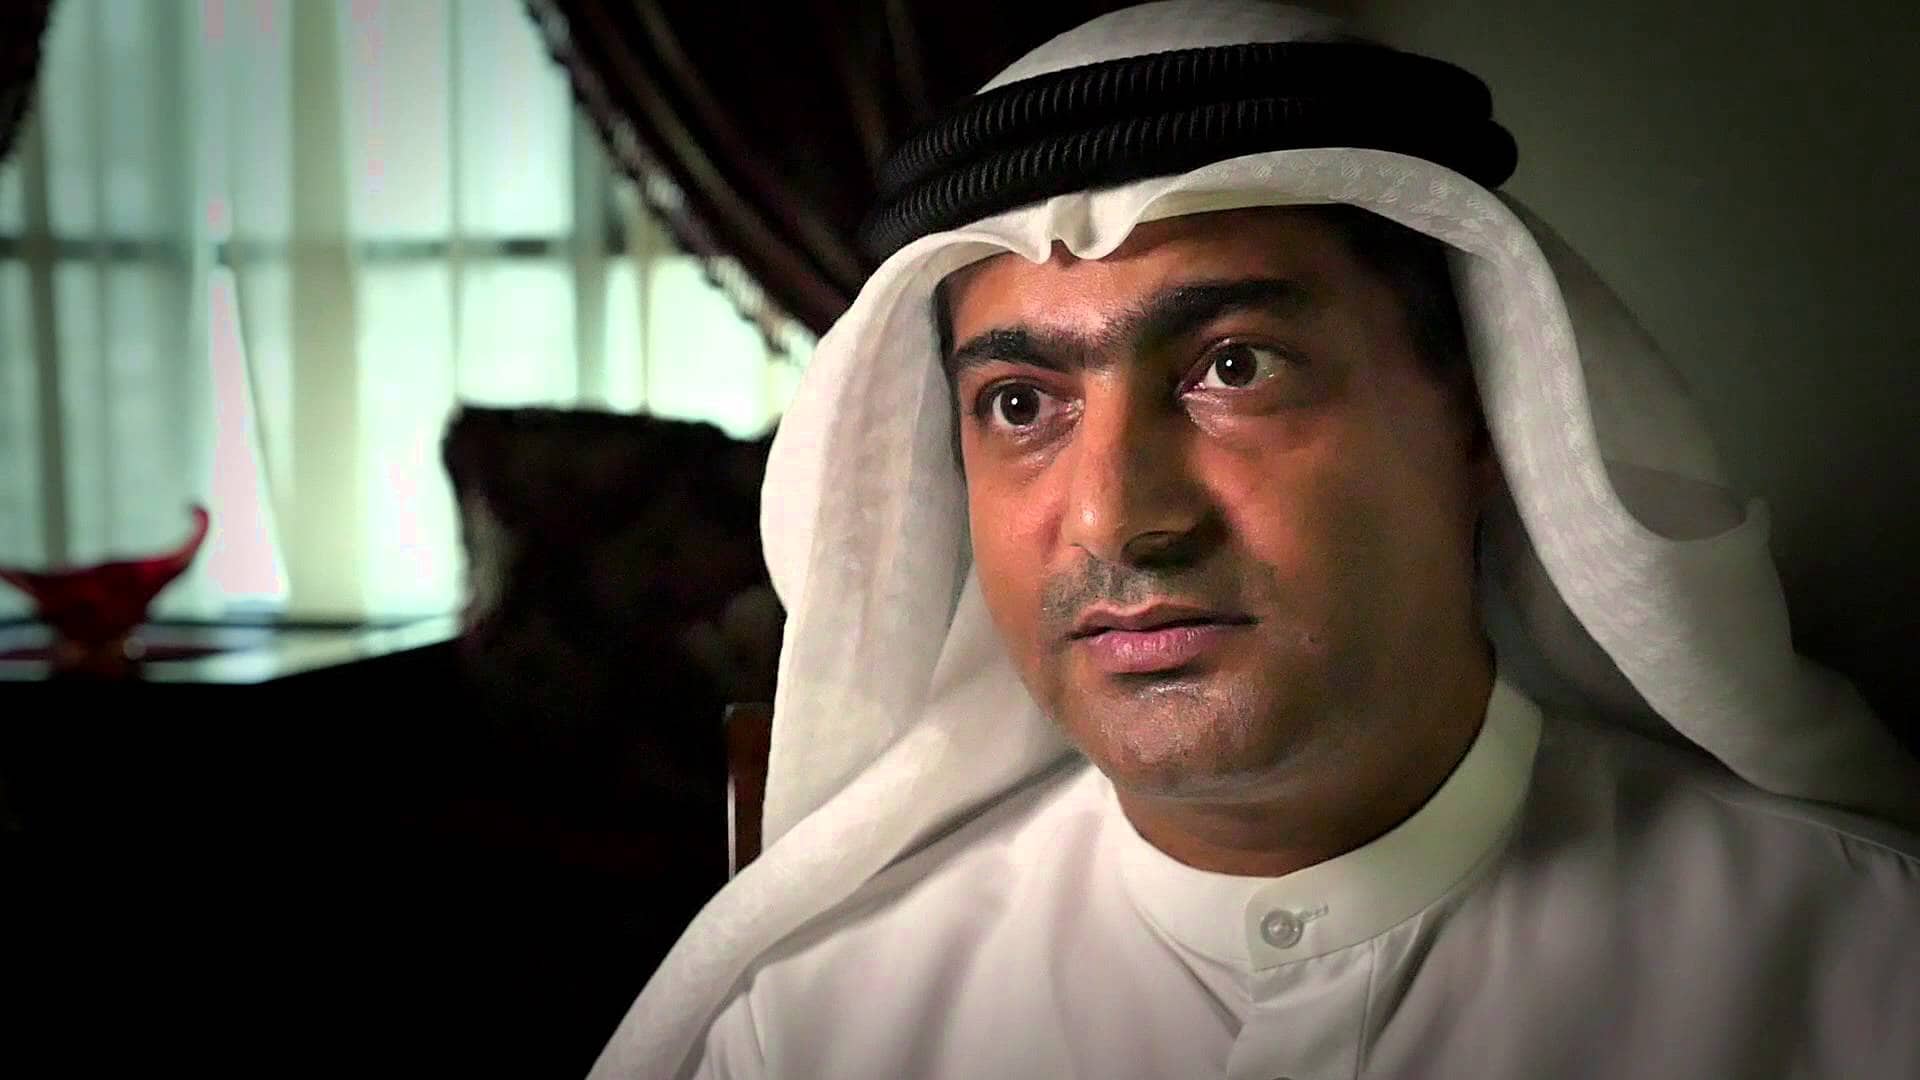 UAE Activist Subjected to Reprisal for Exposing Abuses in Prison: Rights Groups